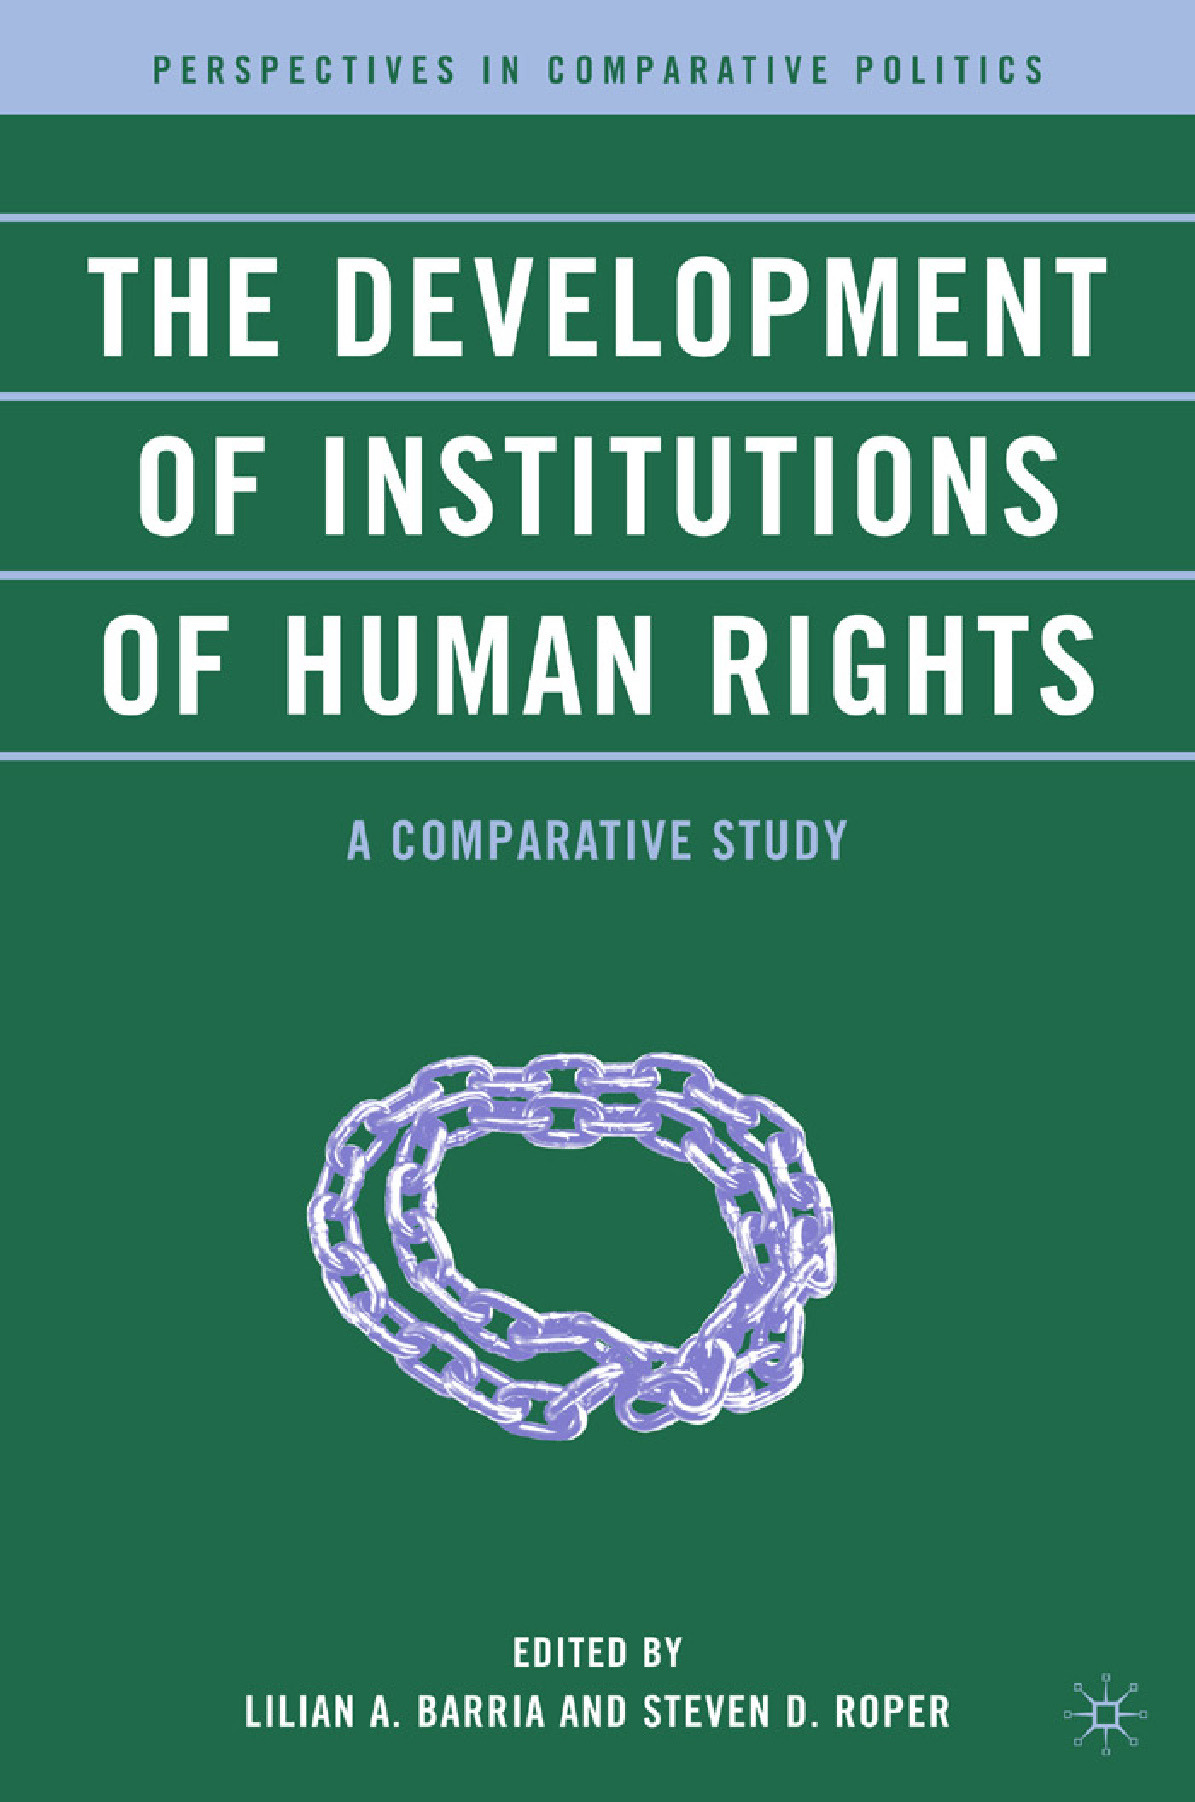 Barria, Lilian A. - The Development of Institutions of Human Rights, ebook